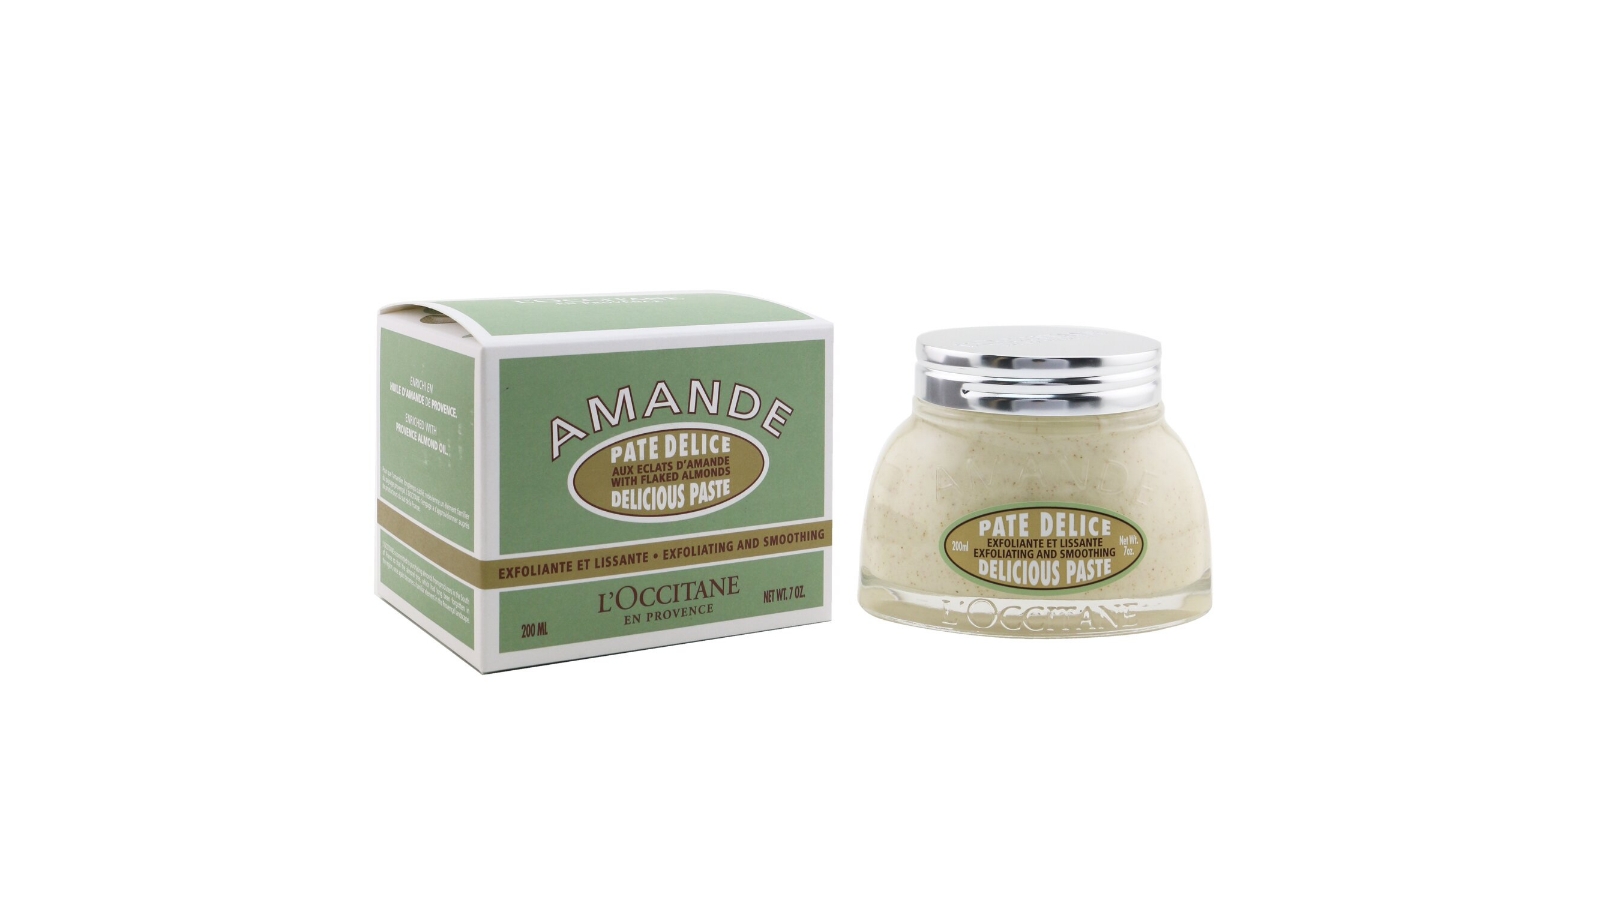 L'Occitane Almond Exfoliating and Smoothing Delicious Paste